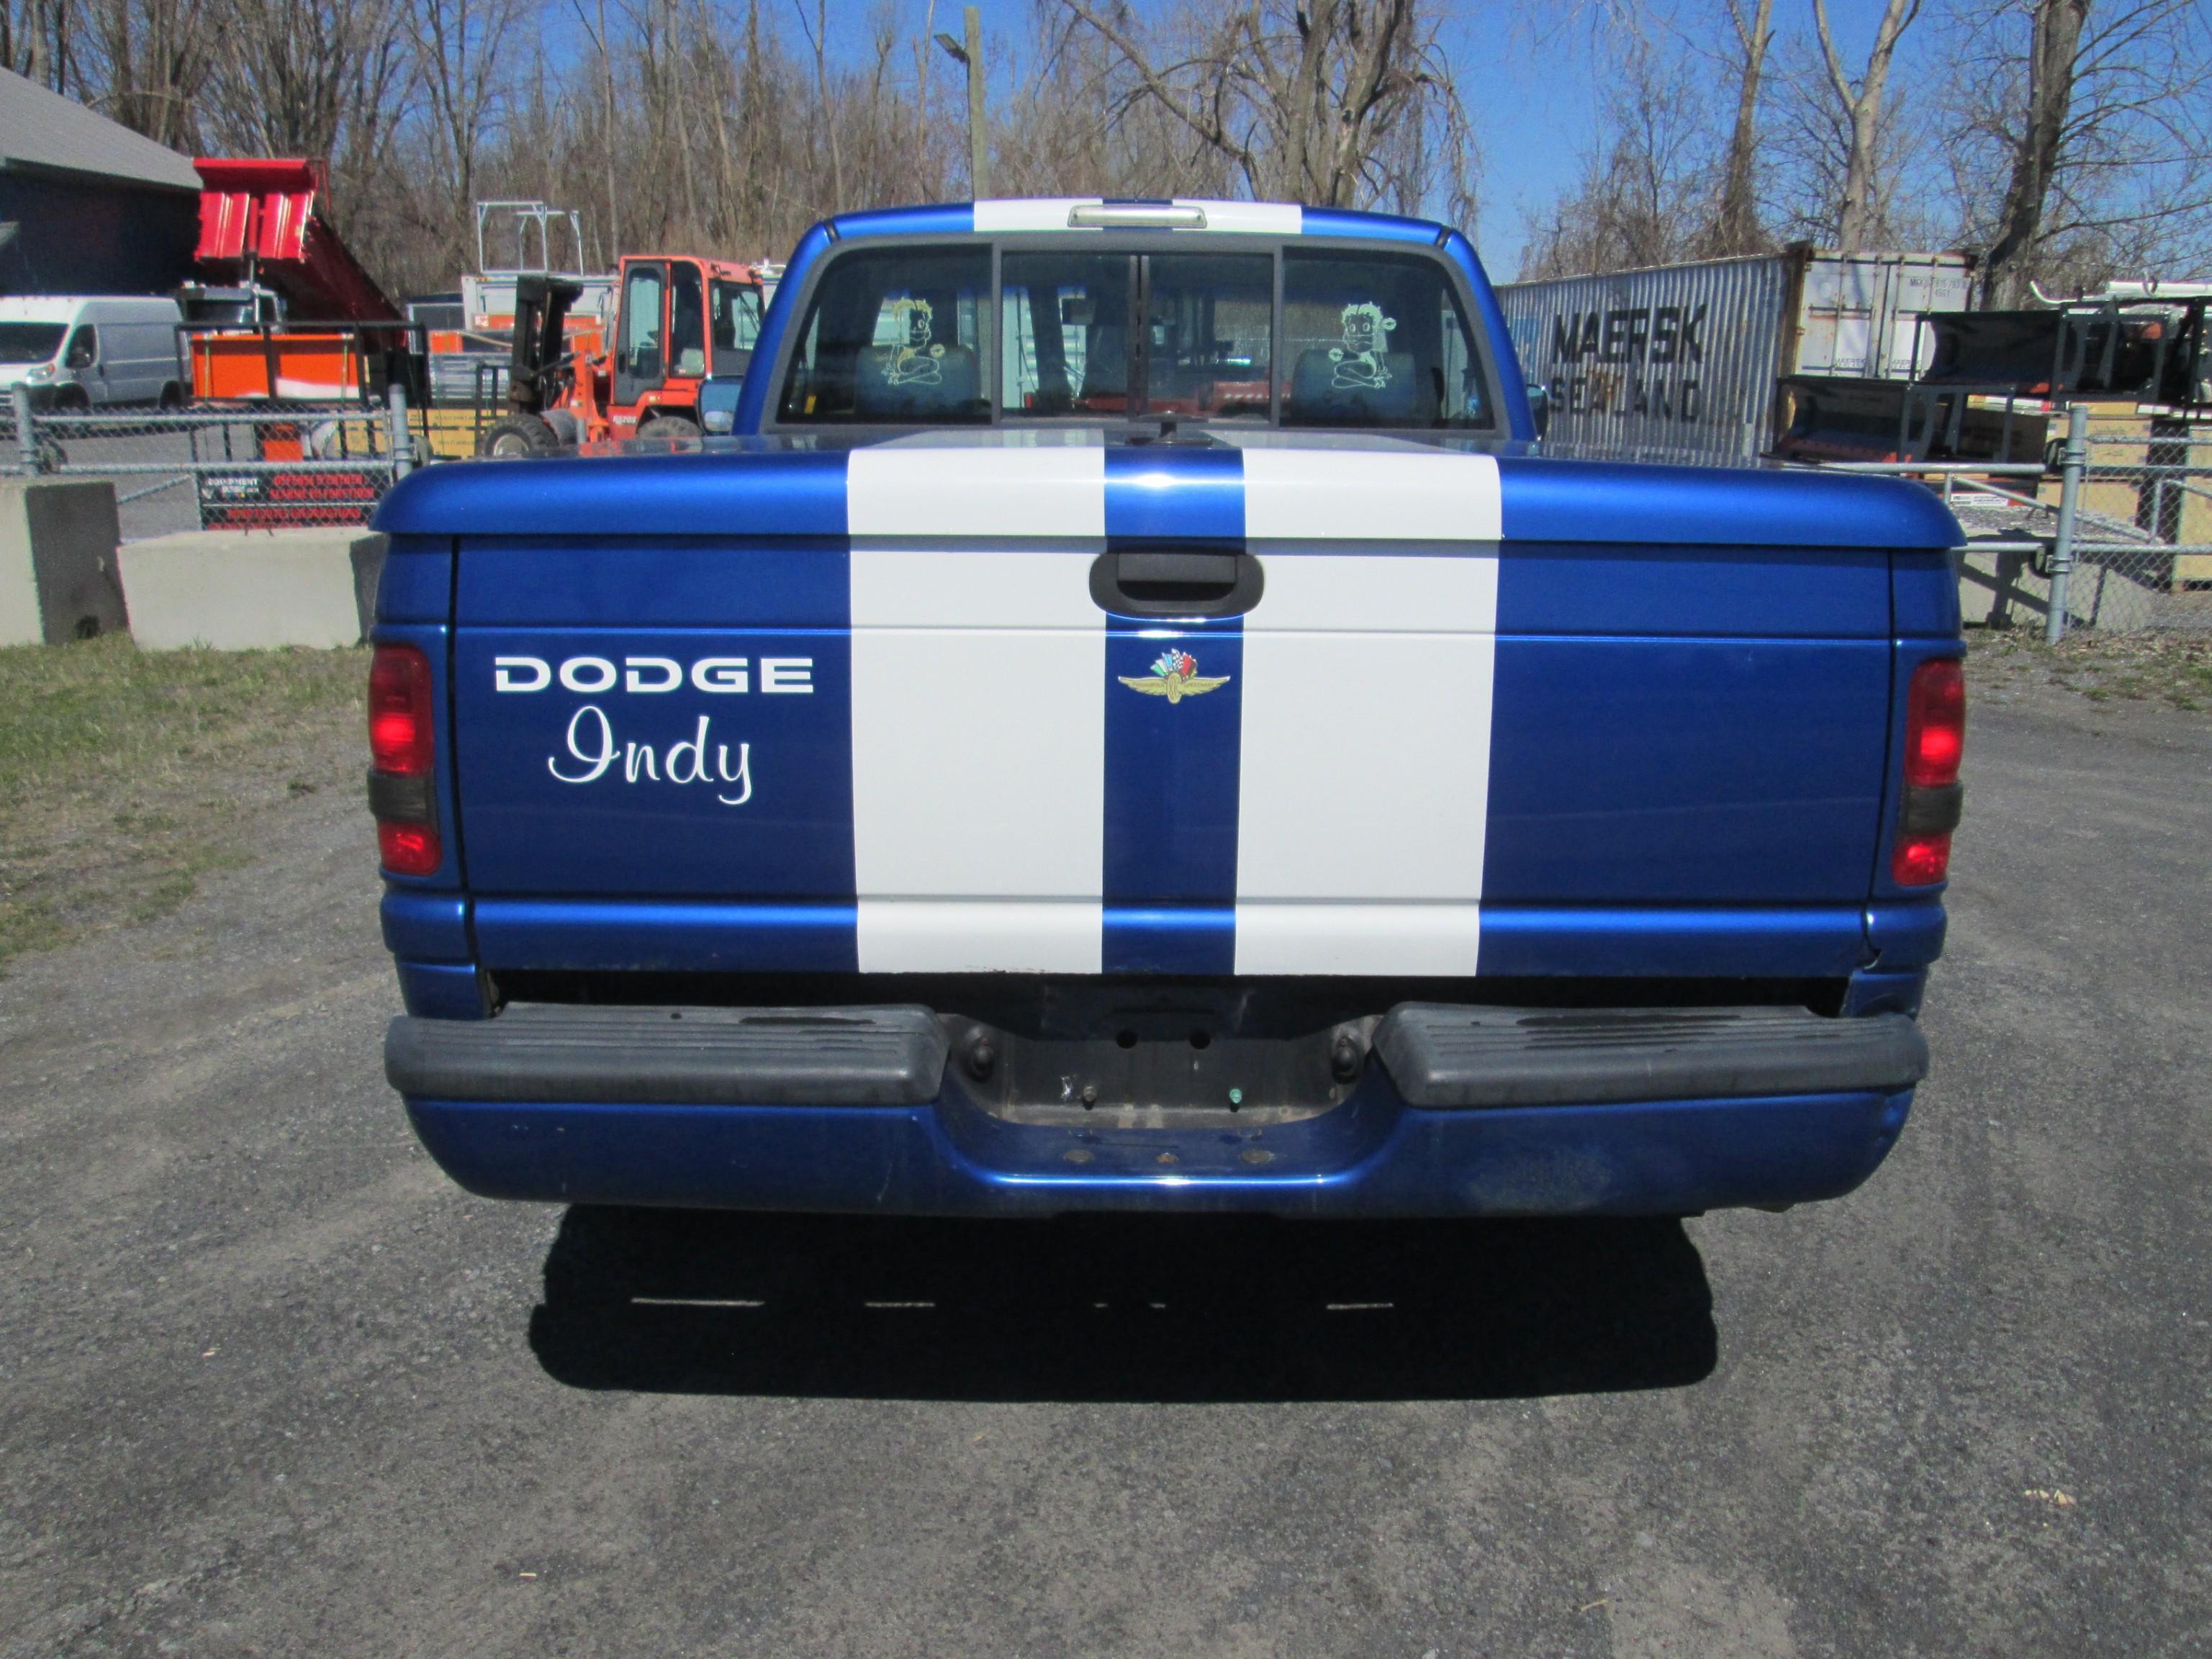 PICKUP TRUCK 1996 Dodge 1500 OFFICIAL 80th Anniversary Indianapolis 500 pick up truck SN